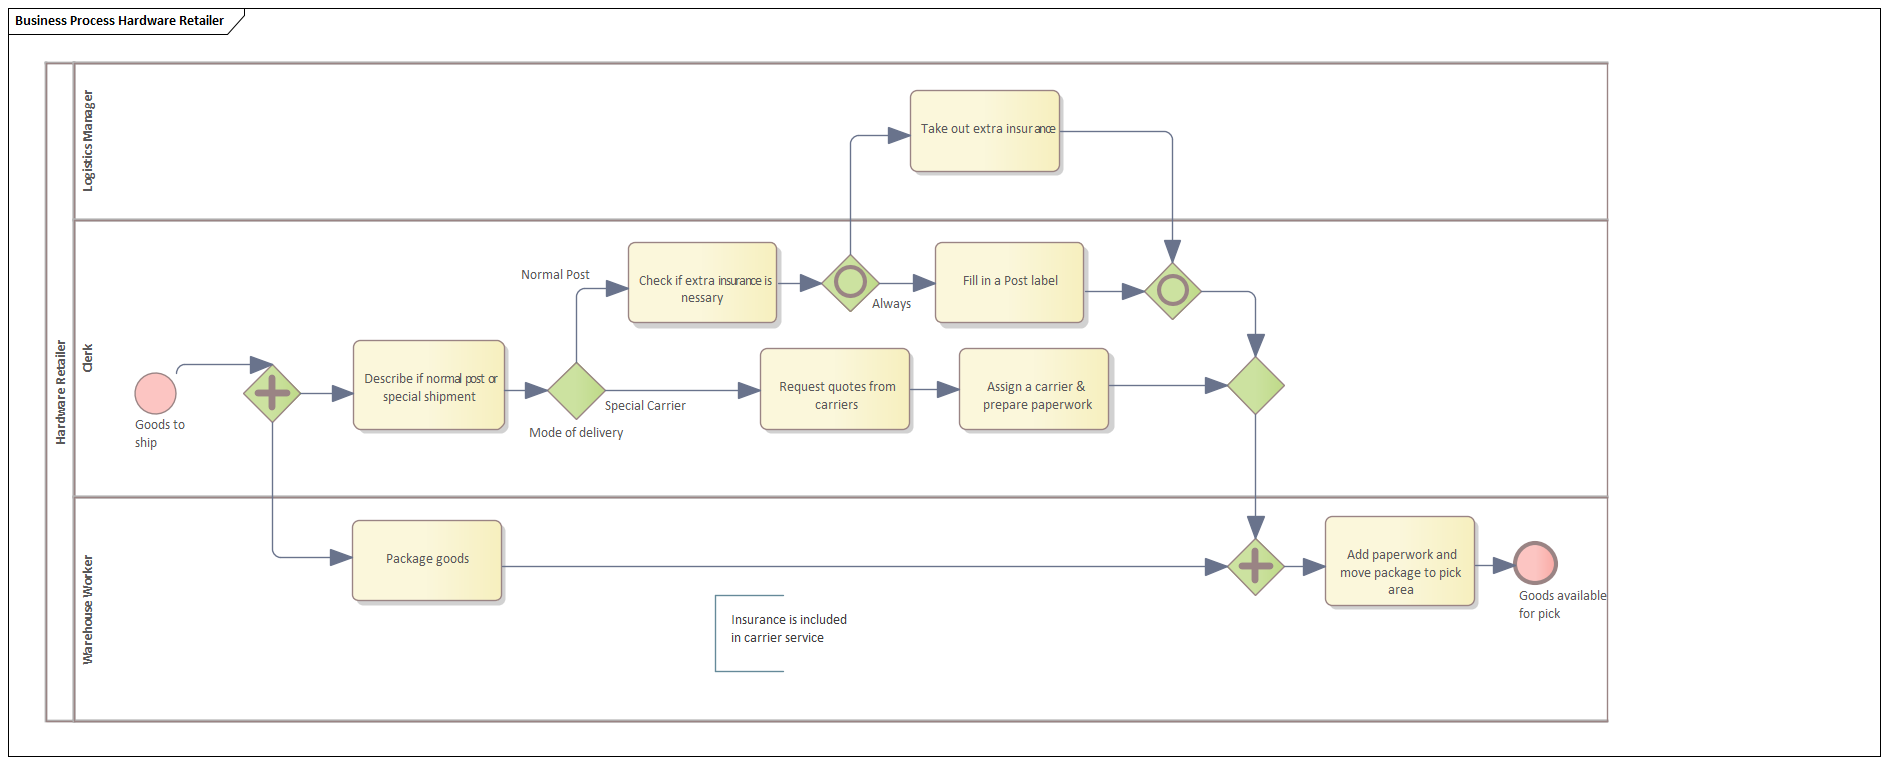 BPMN Business Process model for simulation in Sparx Systems Enterprise Architect